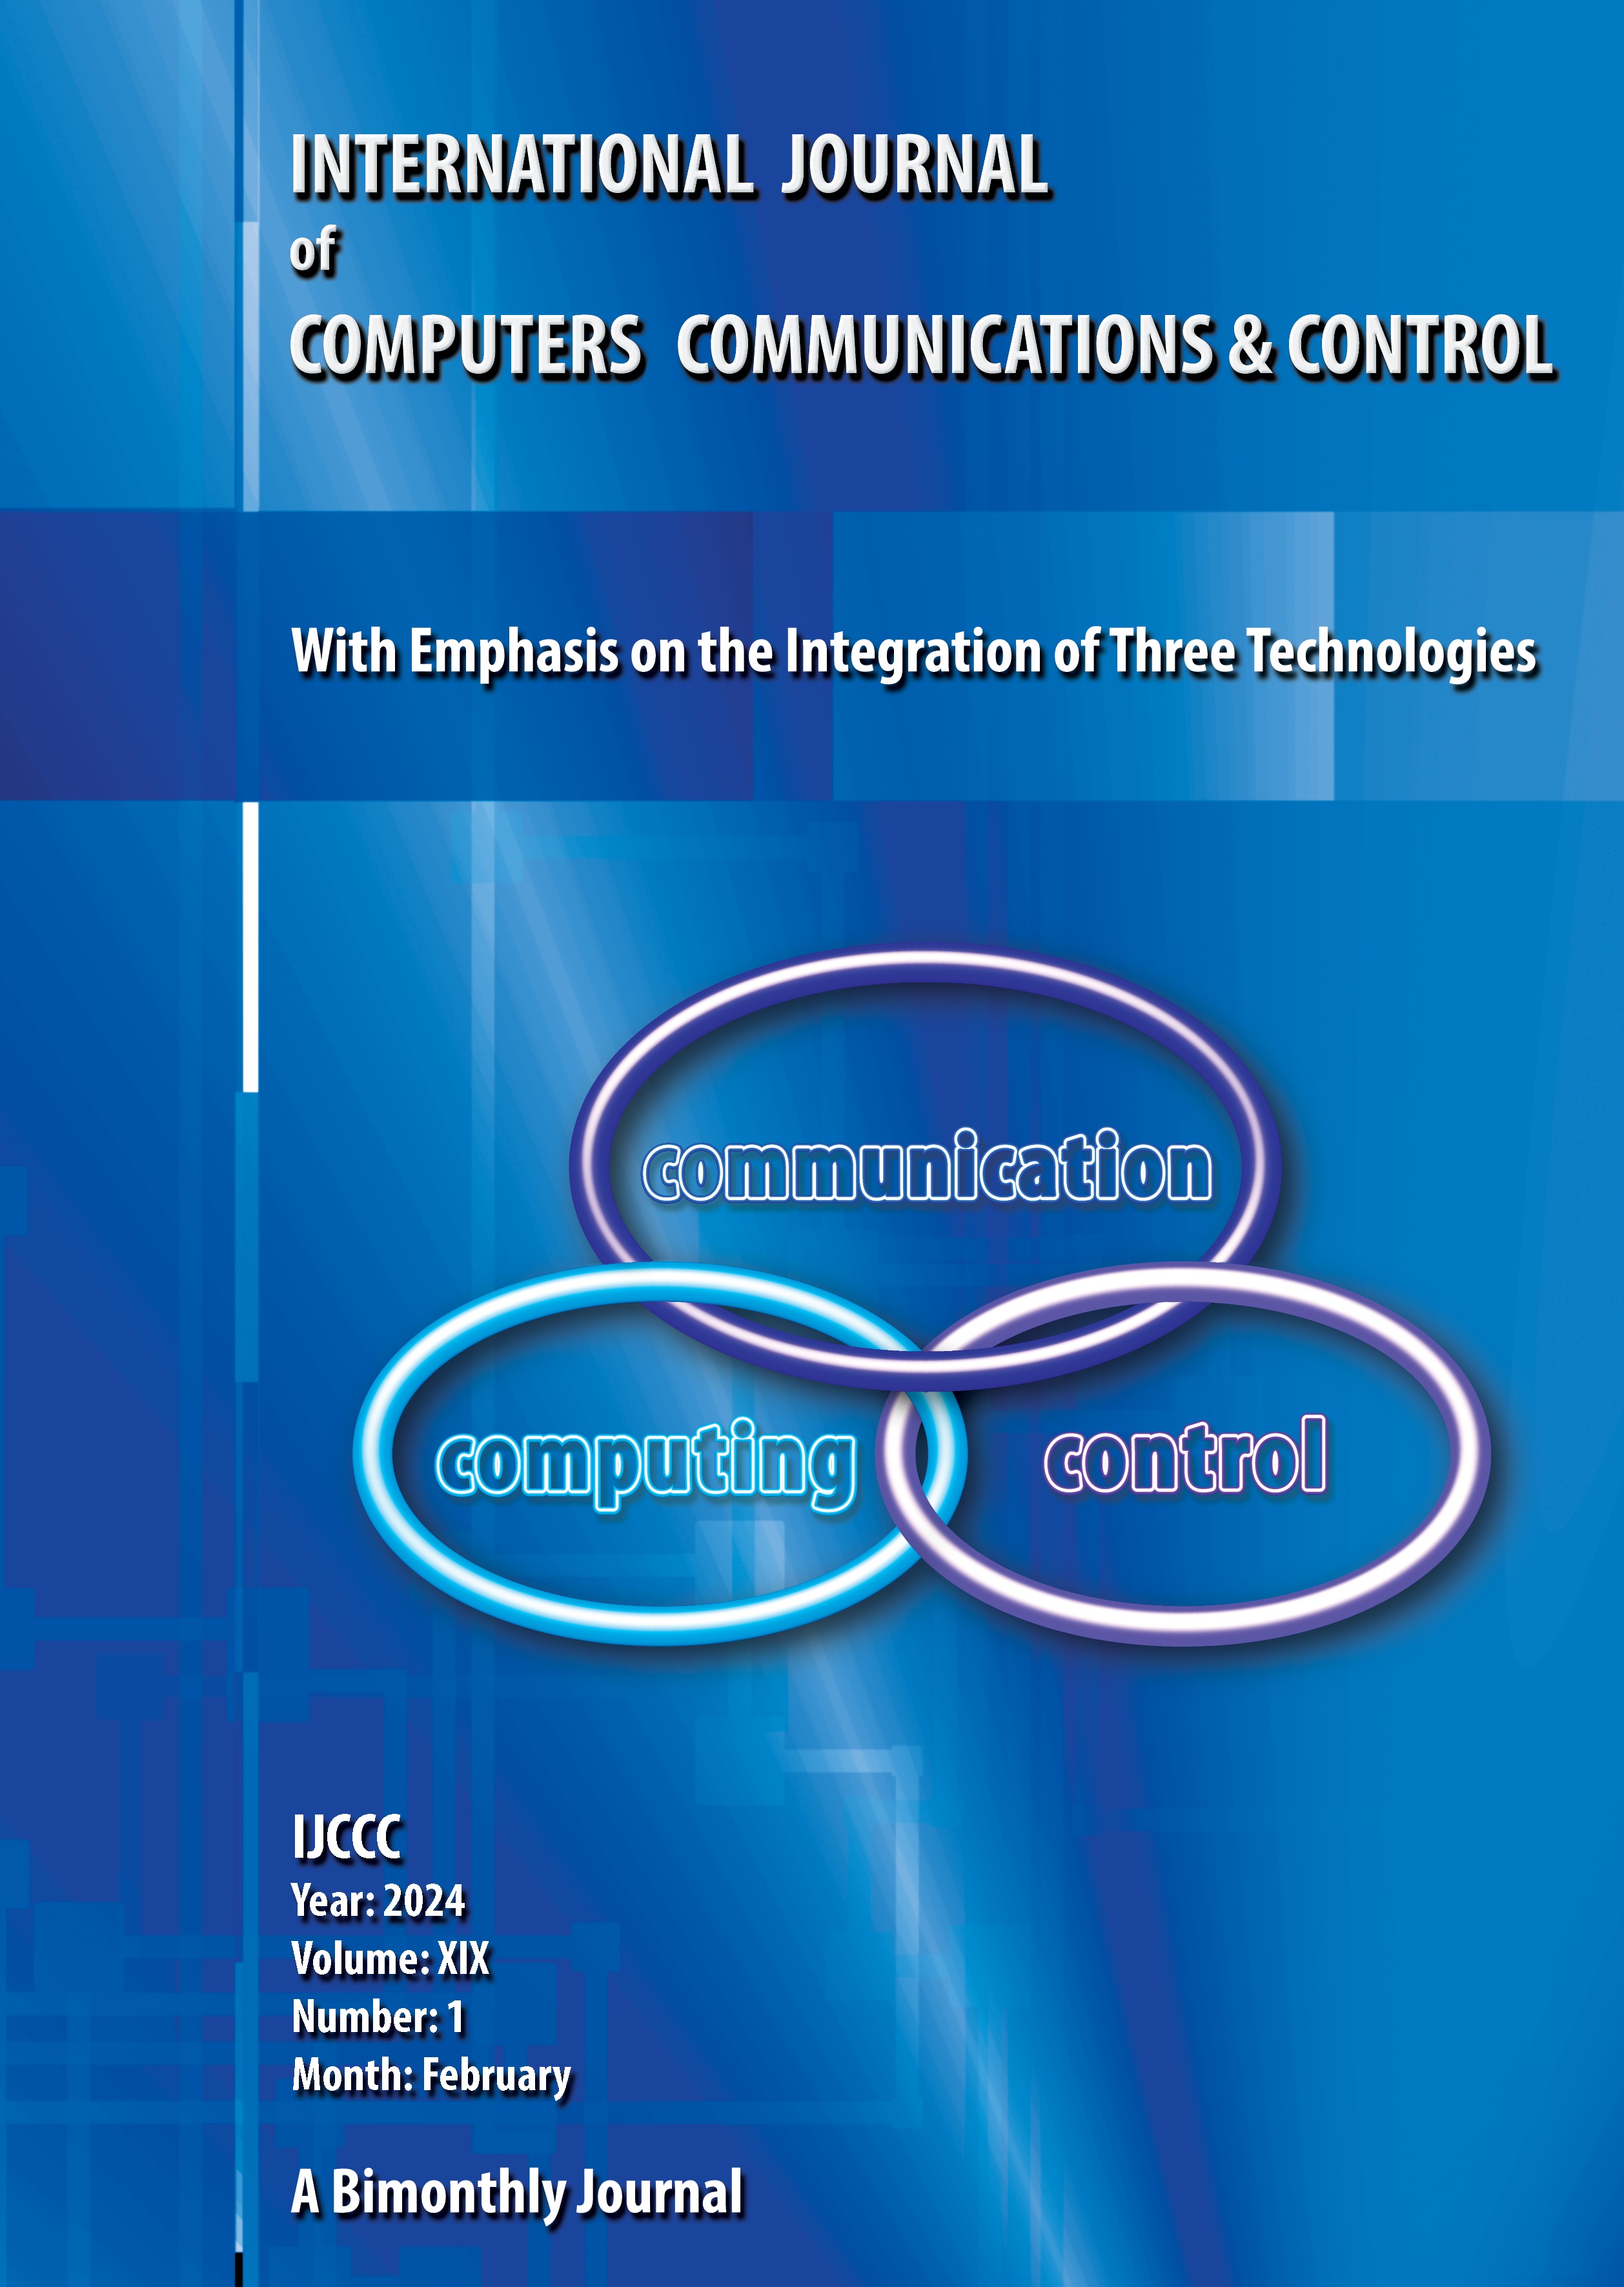 					View Vol. 19 No. 1 (2024): International Journal of Computers Communications & Control (Februrary)
				